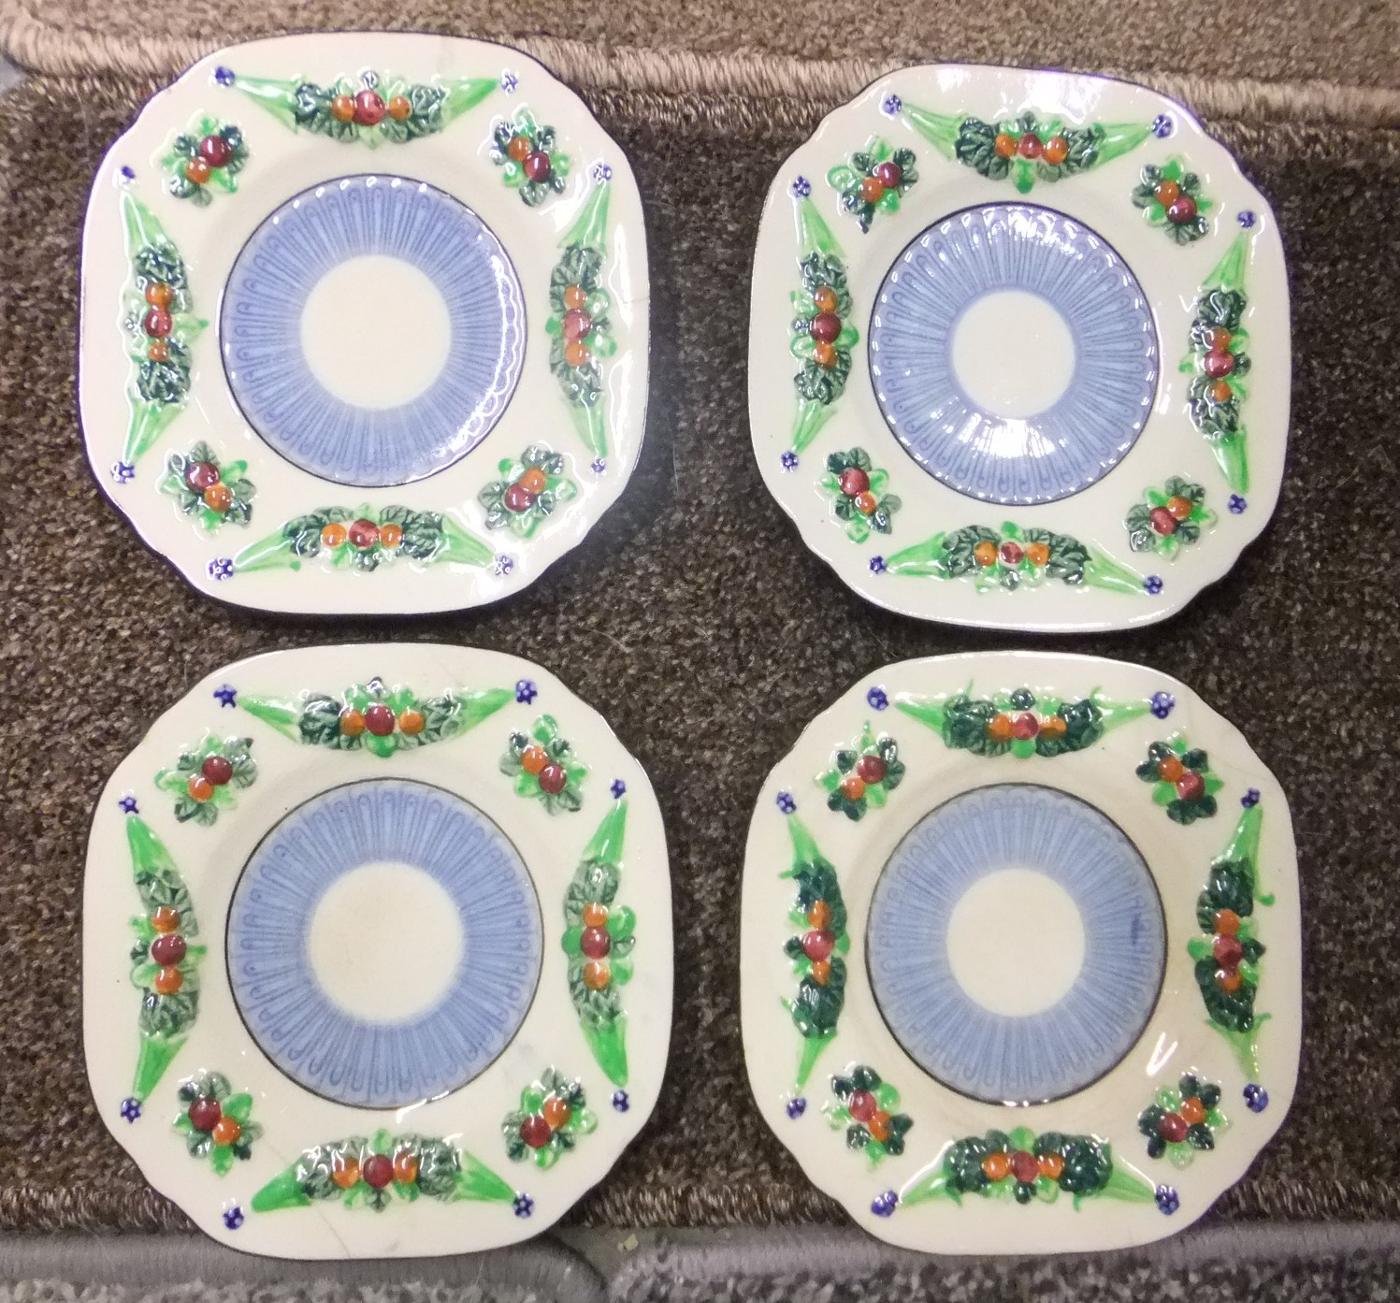 Maruhon Ware Plates or Saucers